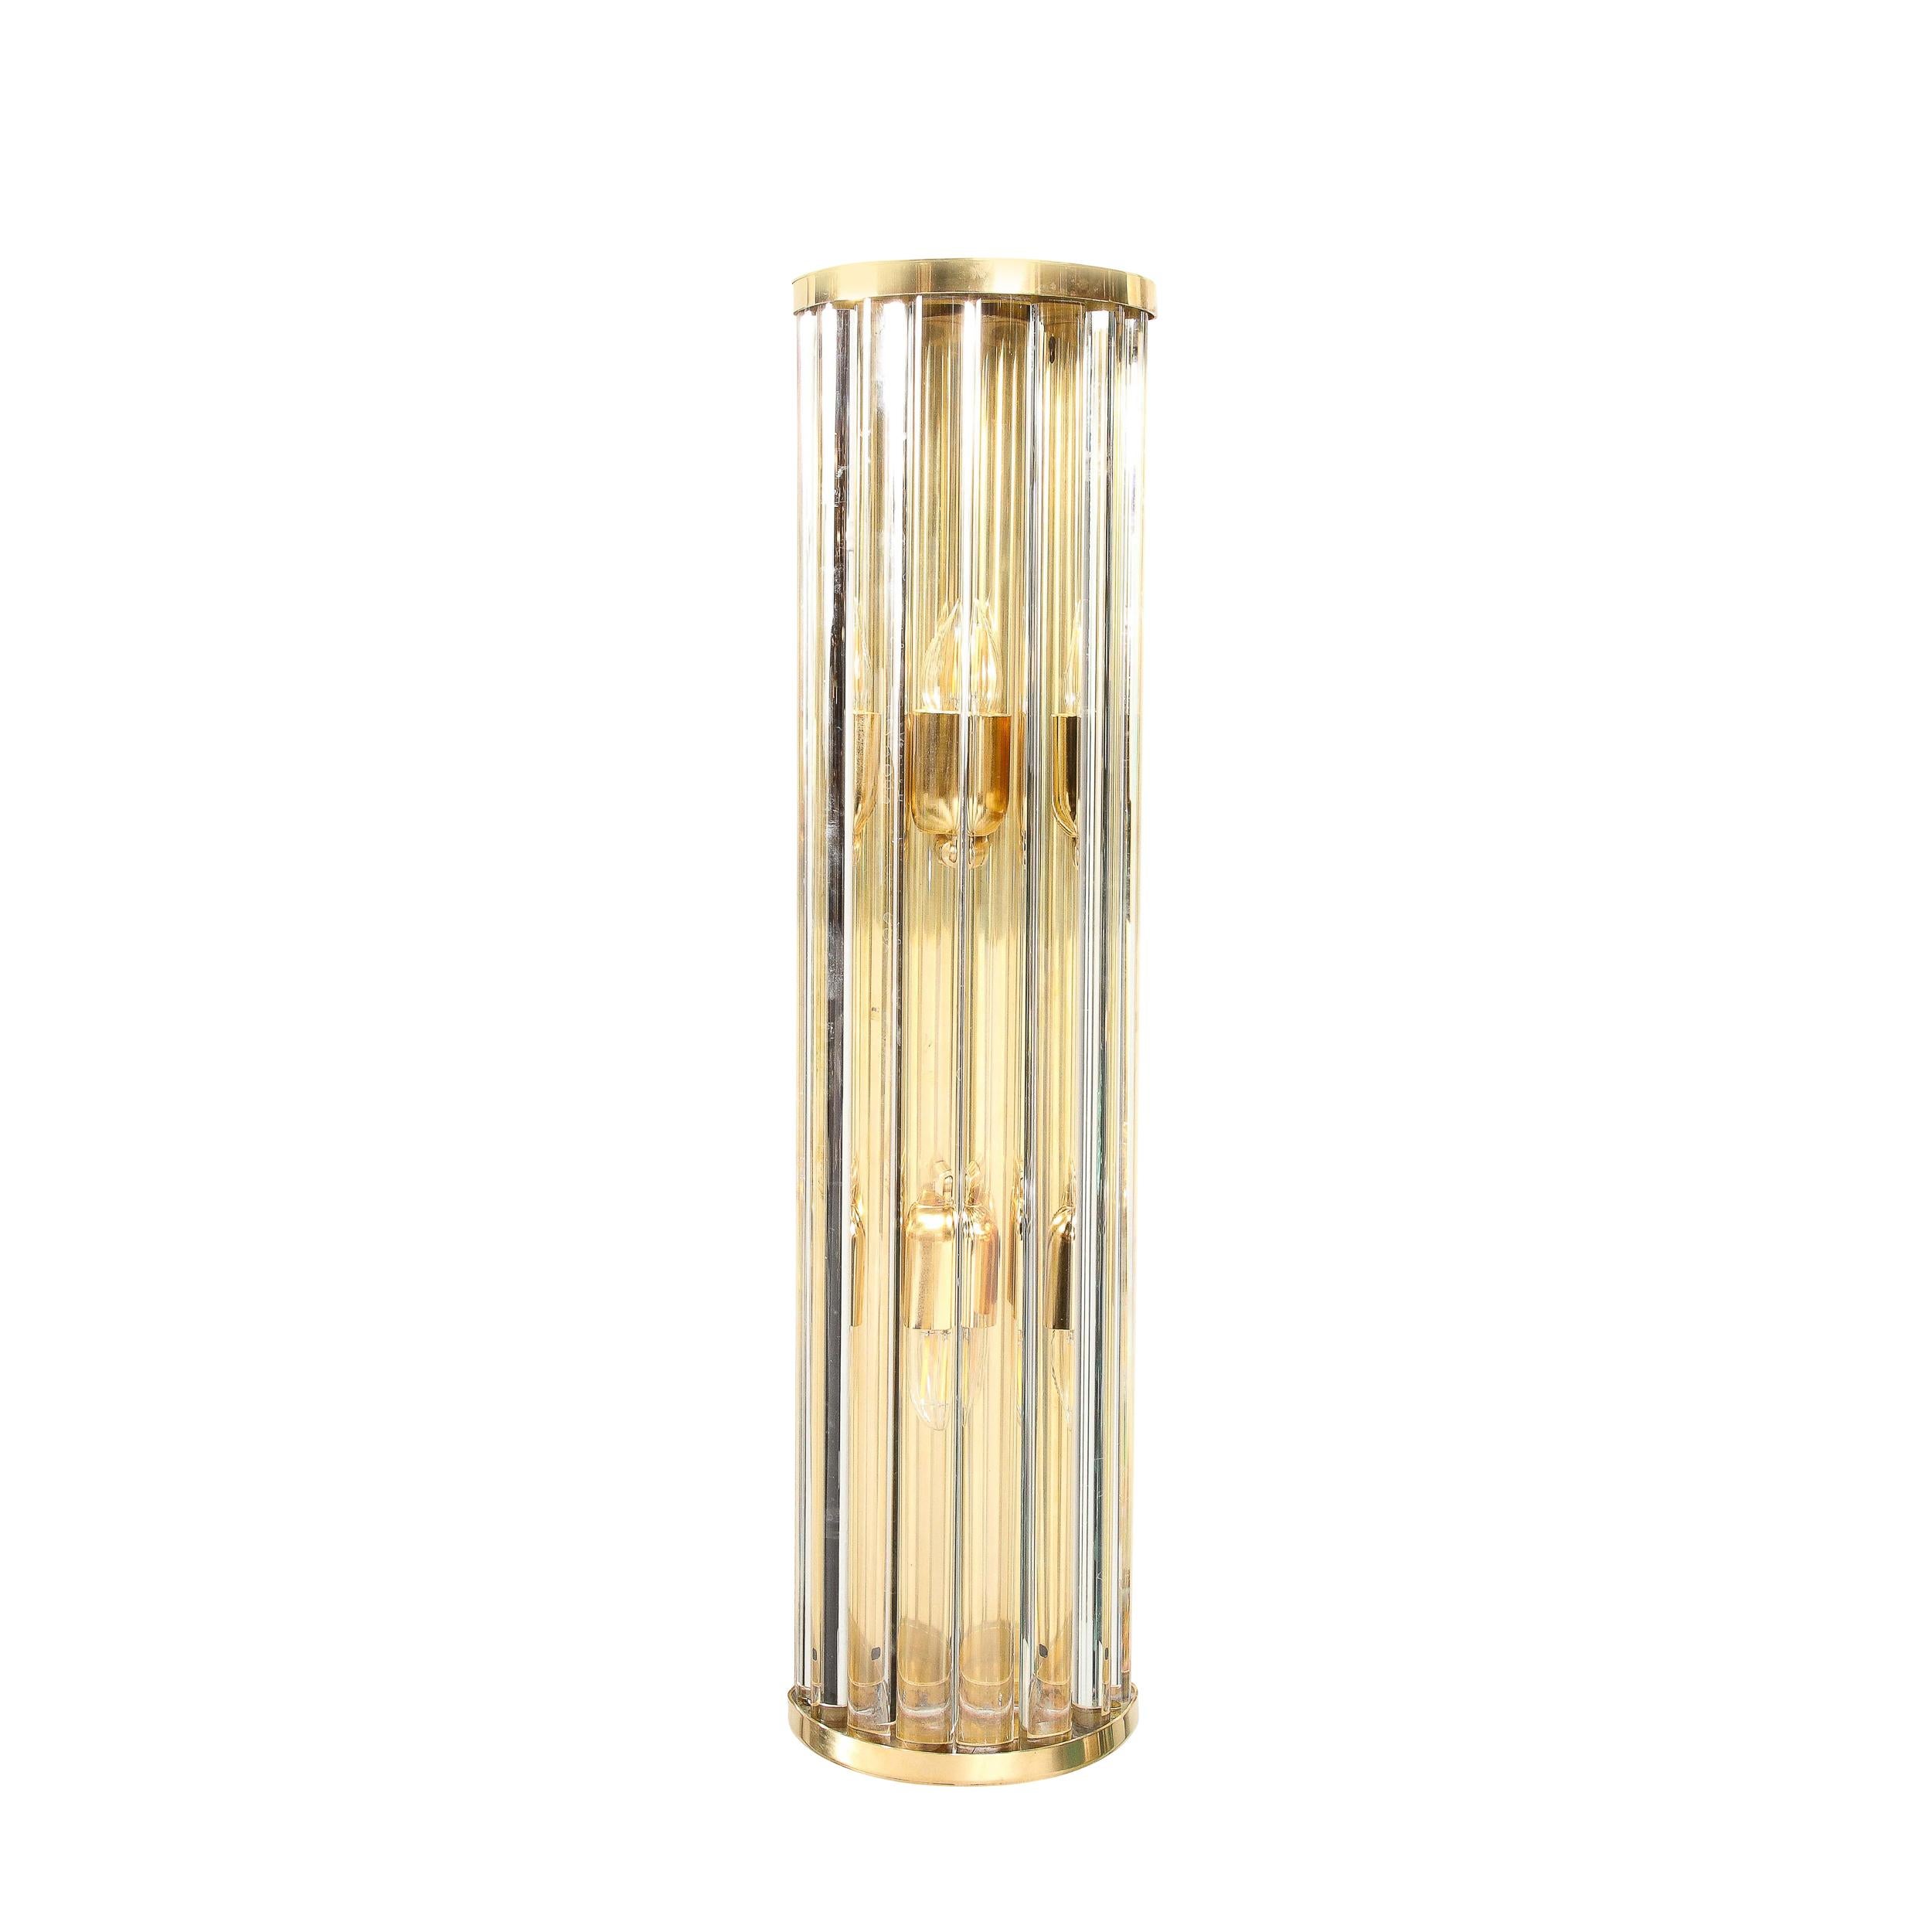 This Pair of Mid-Century Modernist Sconces in Glass Rods and Brass fittings were created by Toso Murano and originate from Italy during the latter half of the 20th Century. Featuring gorgeous translucent glass rods in a curved demilune frame in